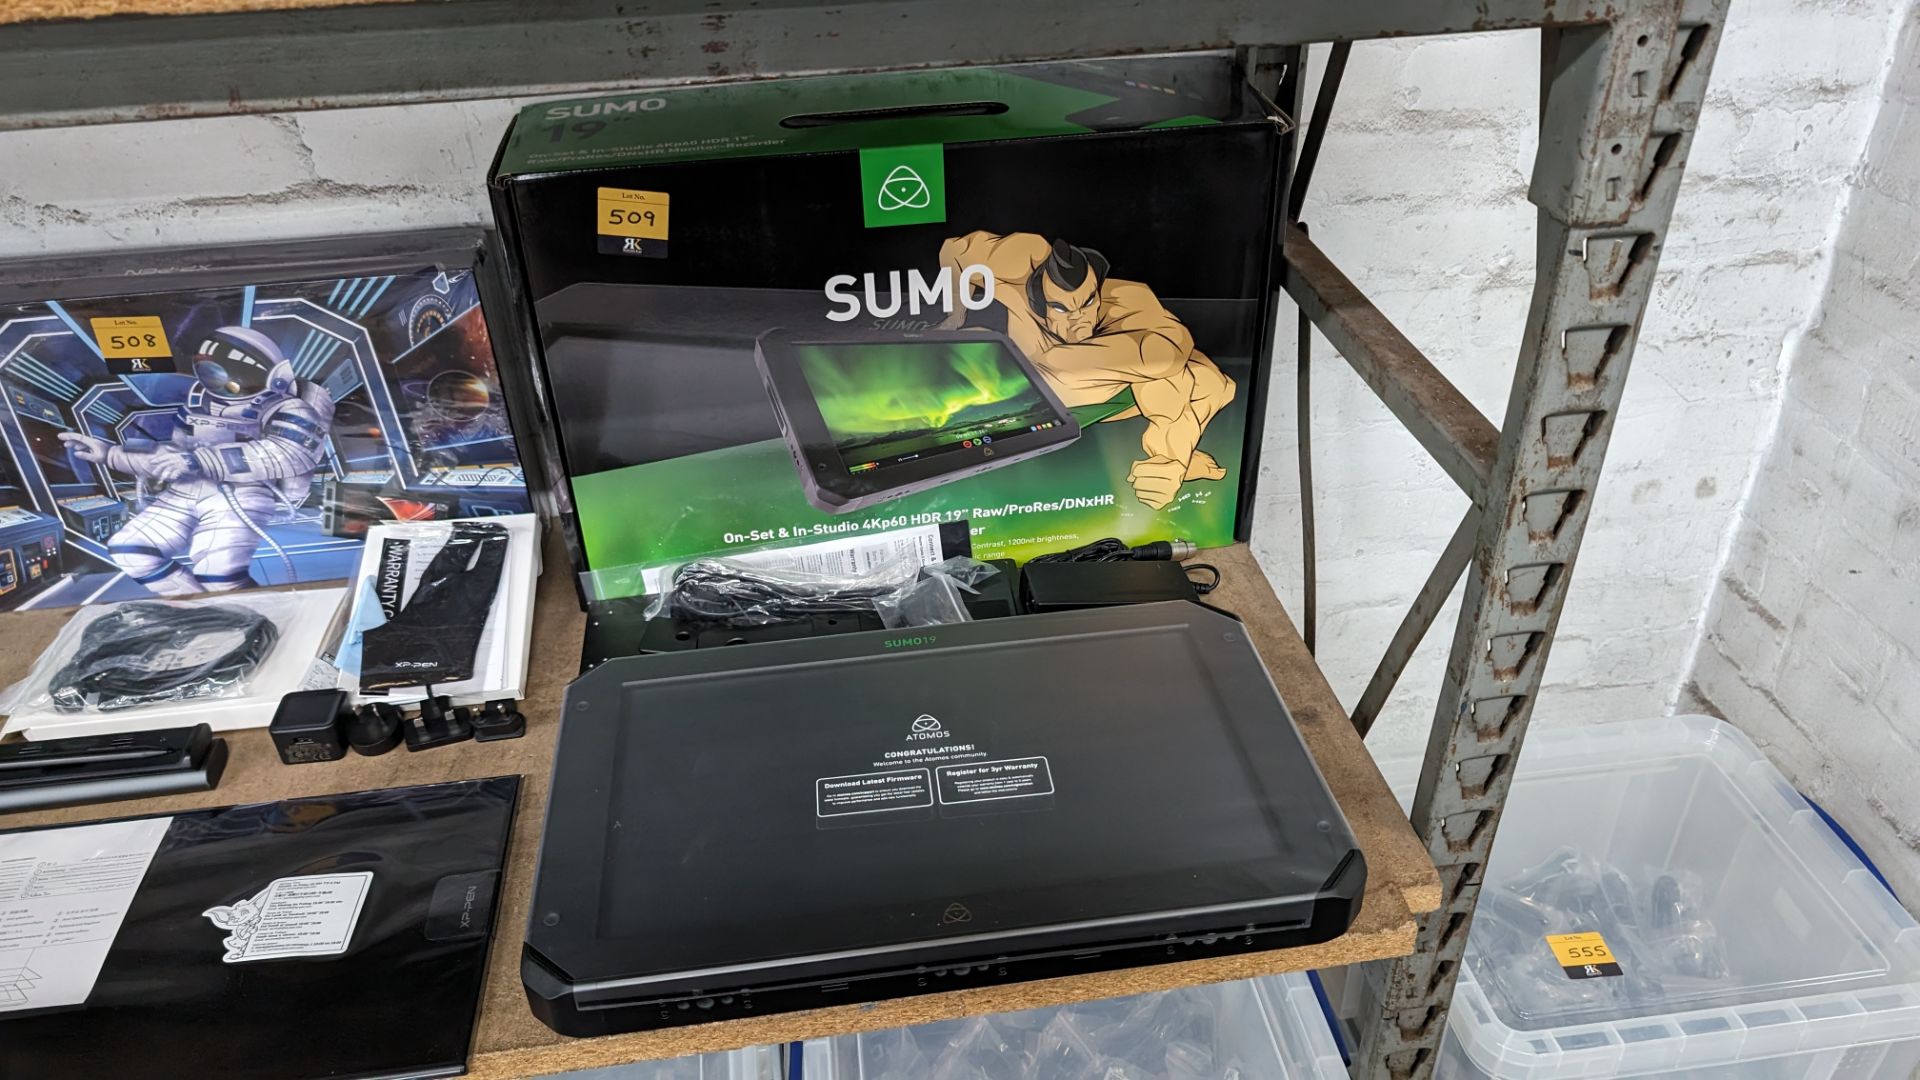 Sumo 19 on-set & in-studio 4KP60 HDR 19" raw/ProRes/DNxHR - Image 2 of 7